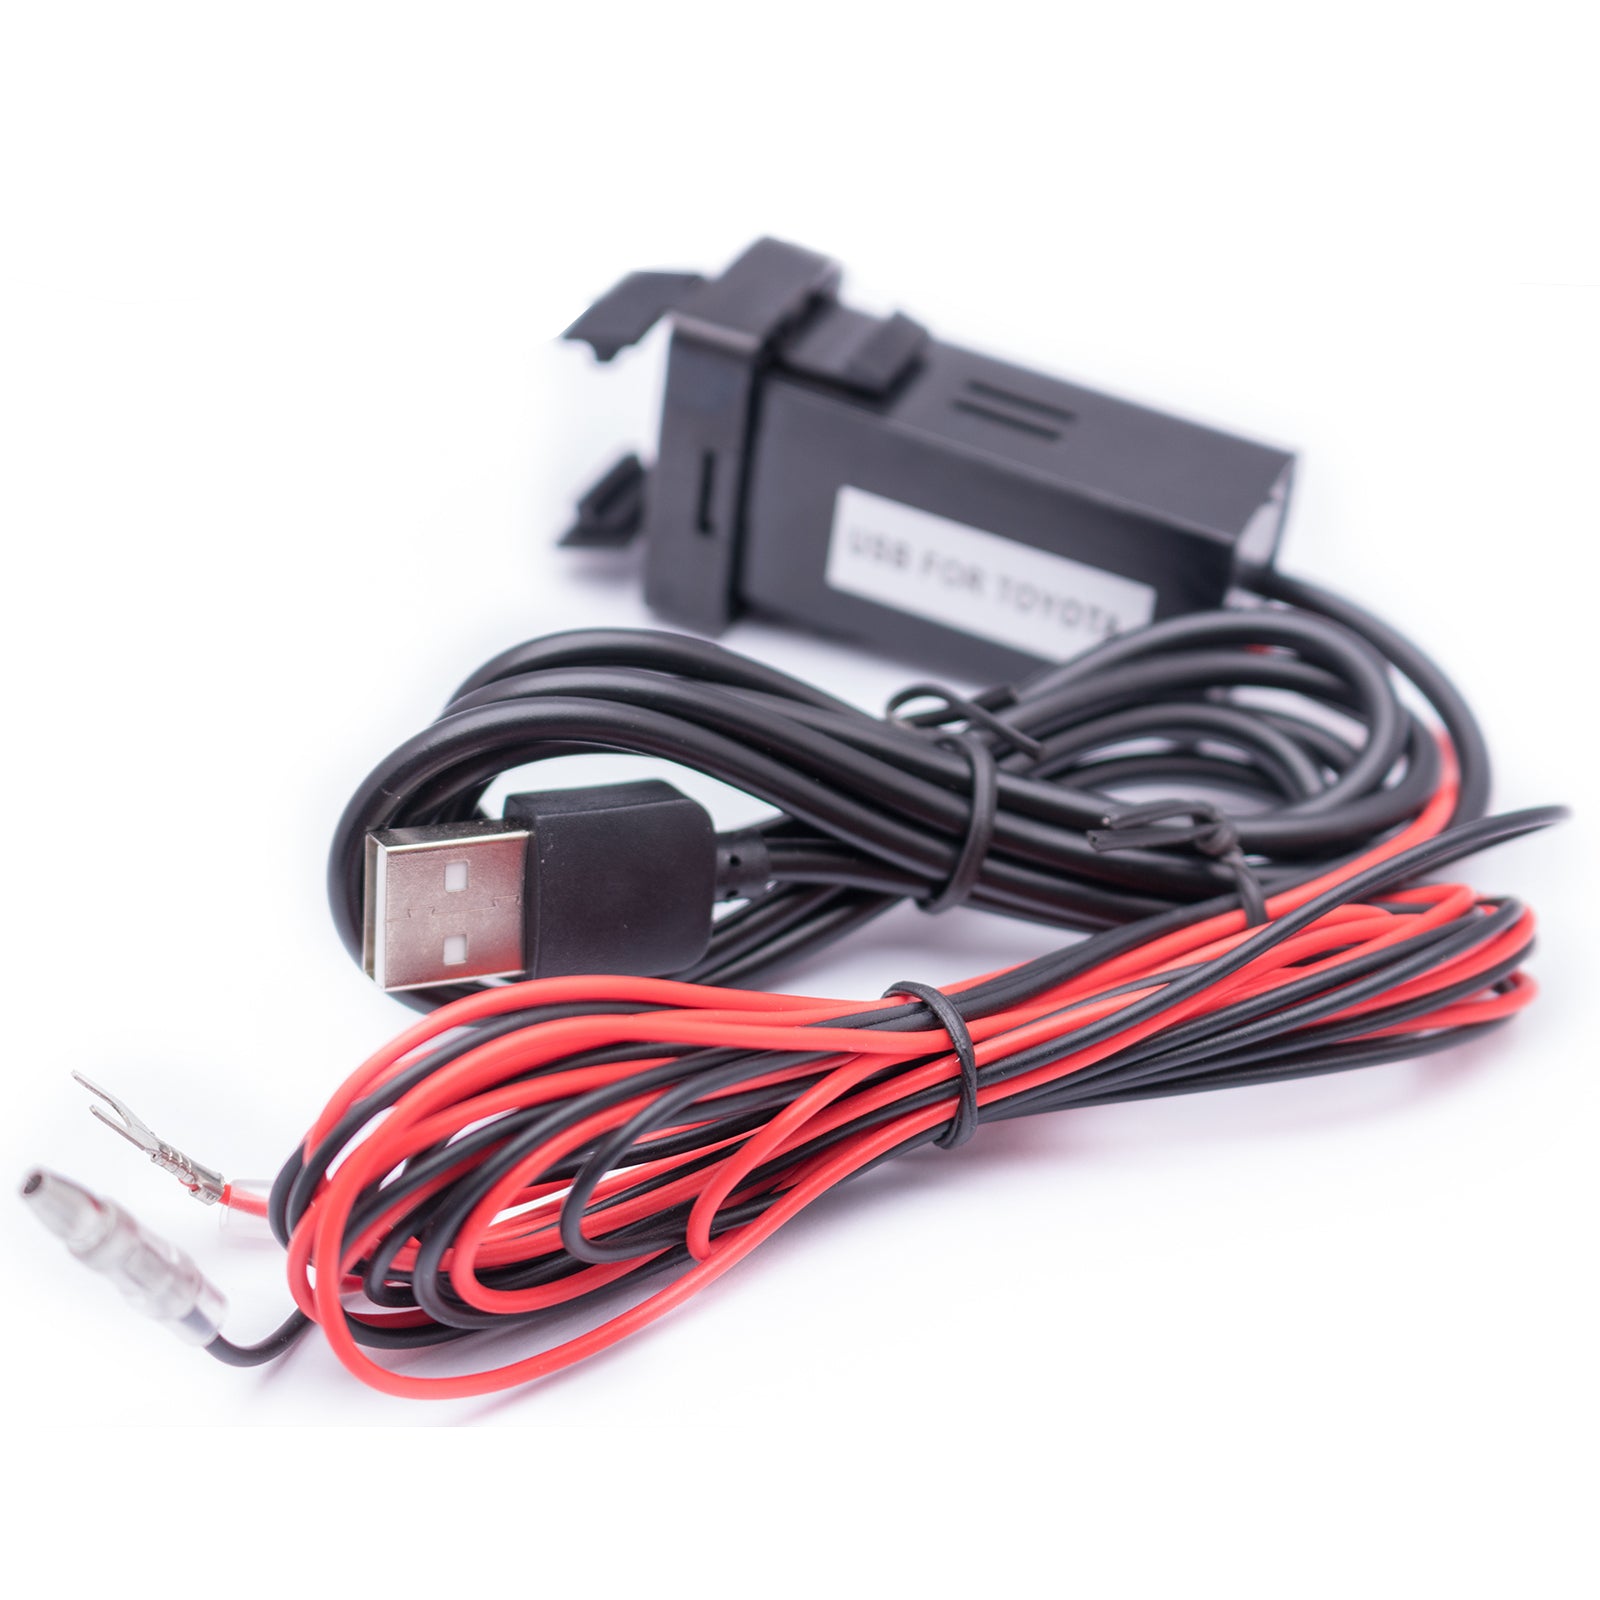 12V Dual USB Port Car USB Charger 2 Port Charger Plug Adapter For Toyota